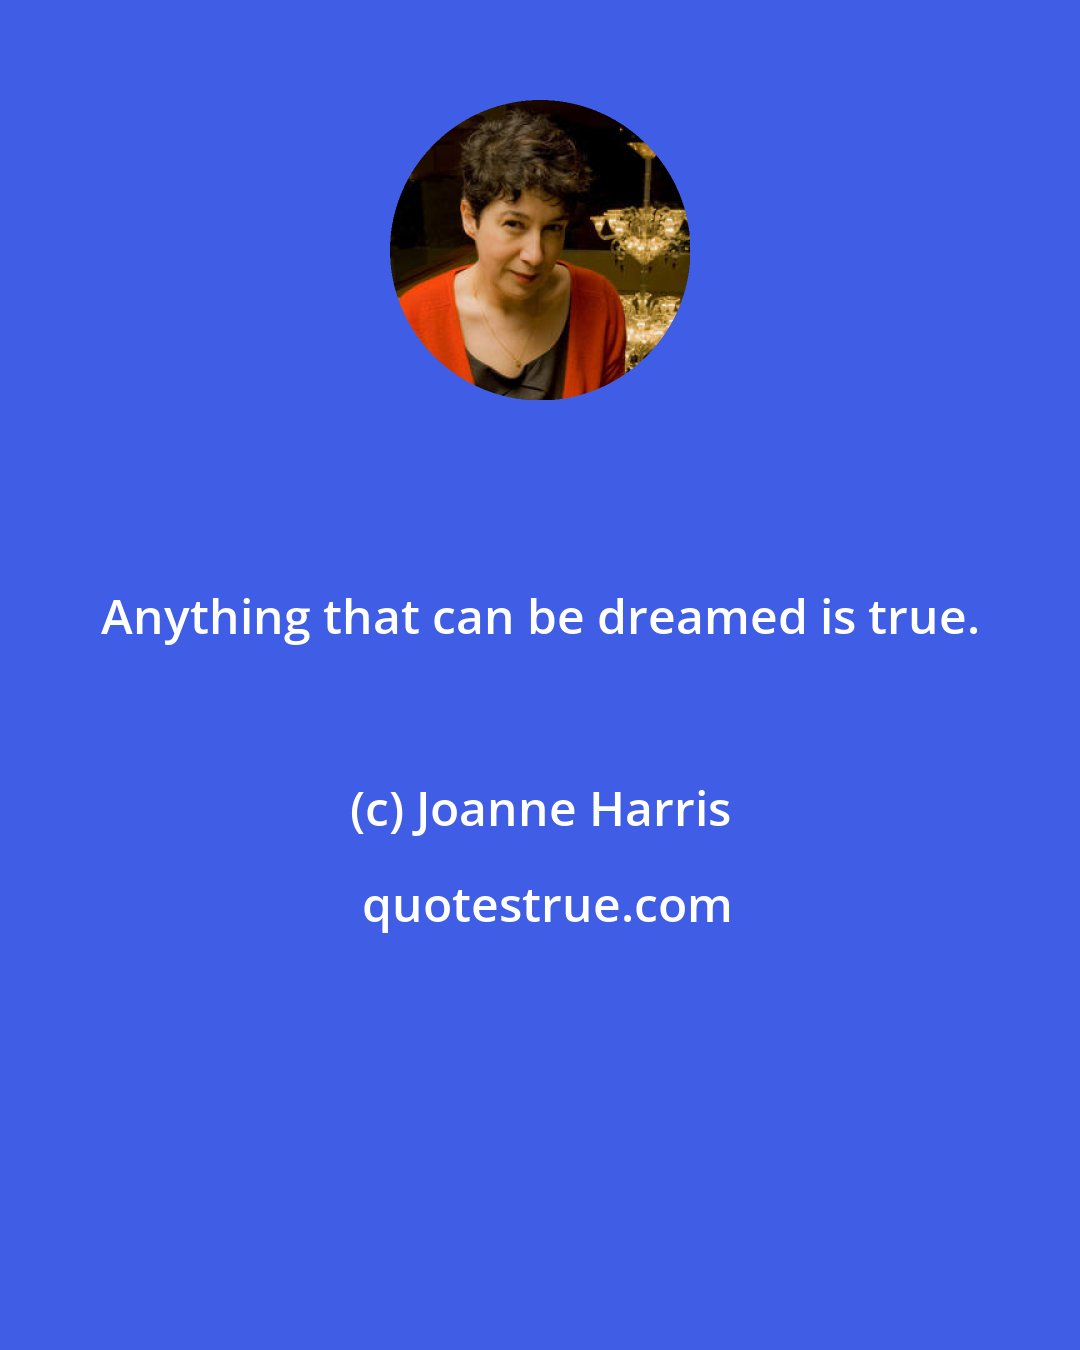 Joanne Harris: Anything that can be dreamed is true.